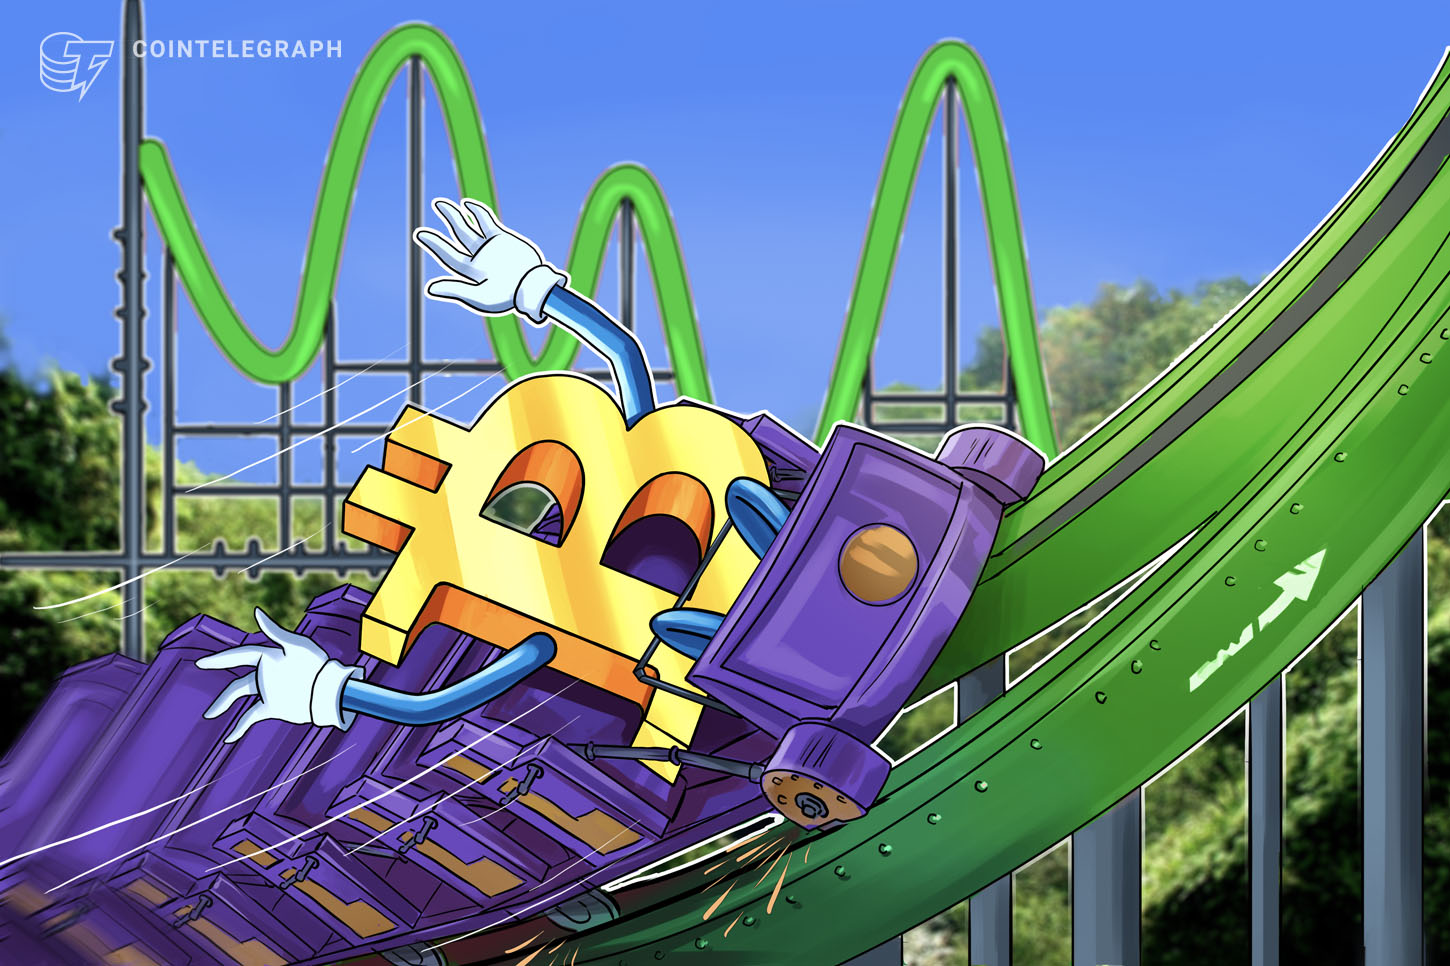 Bitcoin value spikes 5% to $13.5K shortly after ECB stimulus announcement